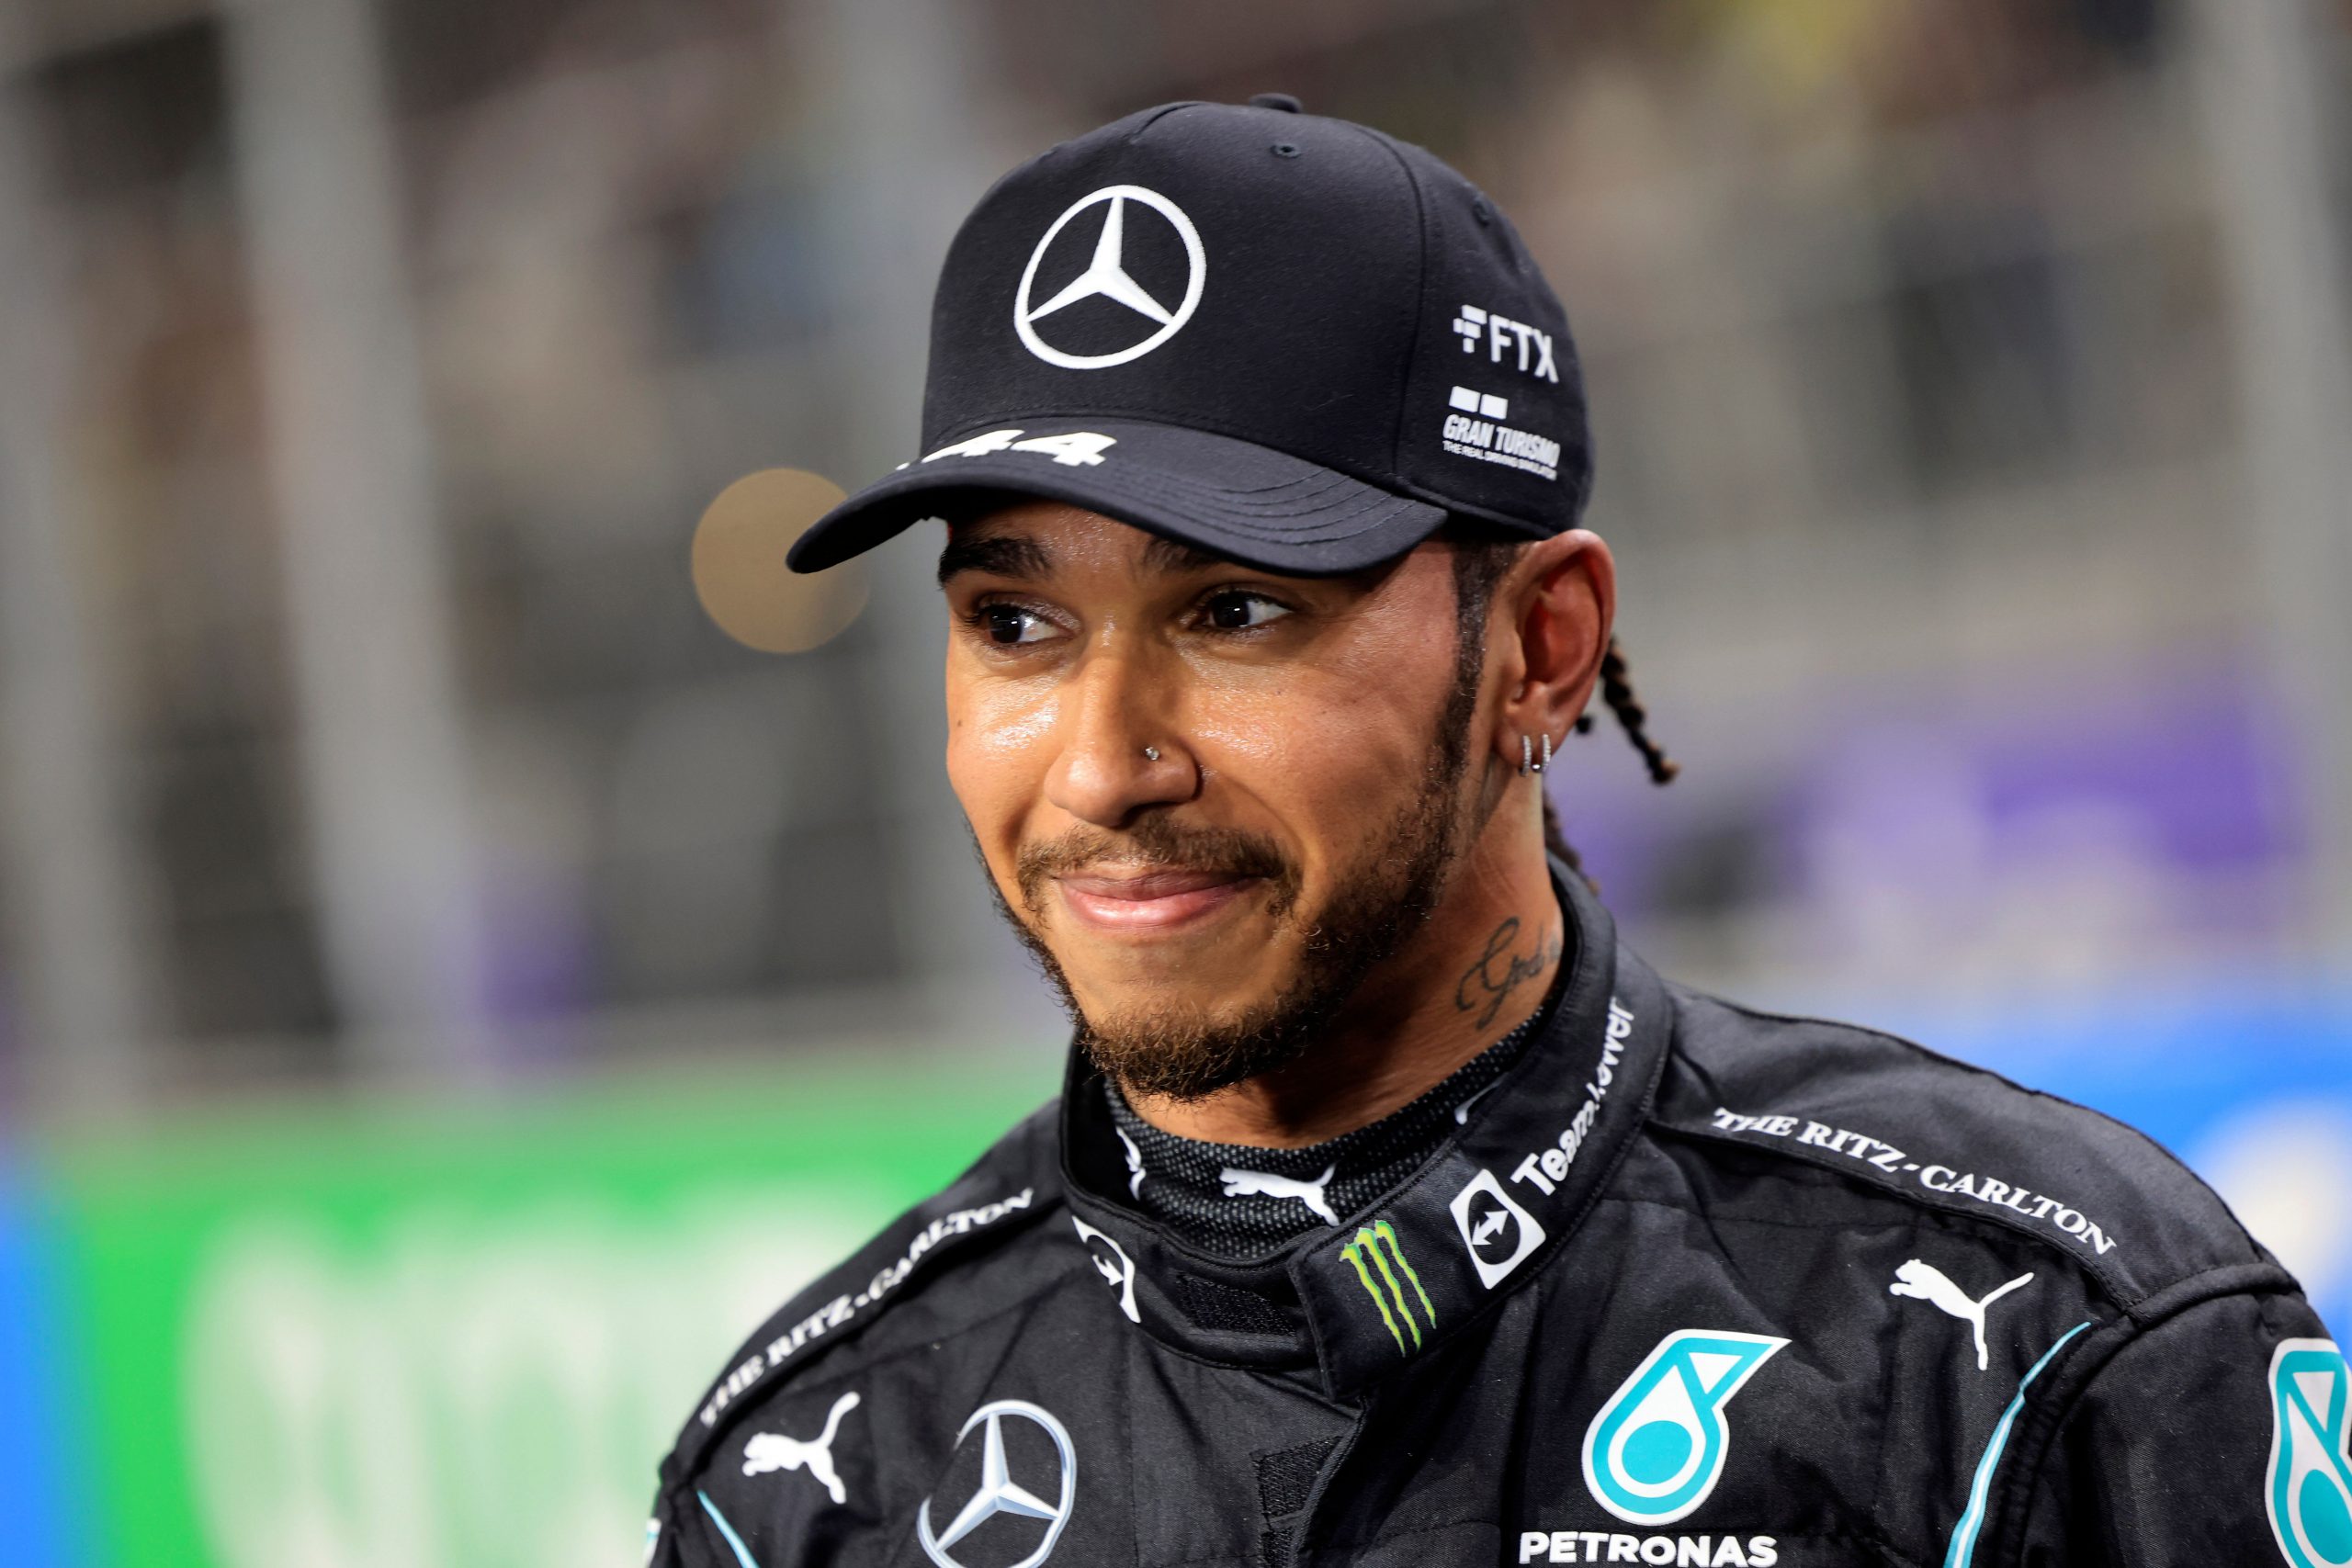 Hamilton ‘fighting with car’, praised for ‘faultless delivery’